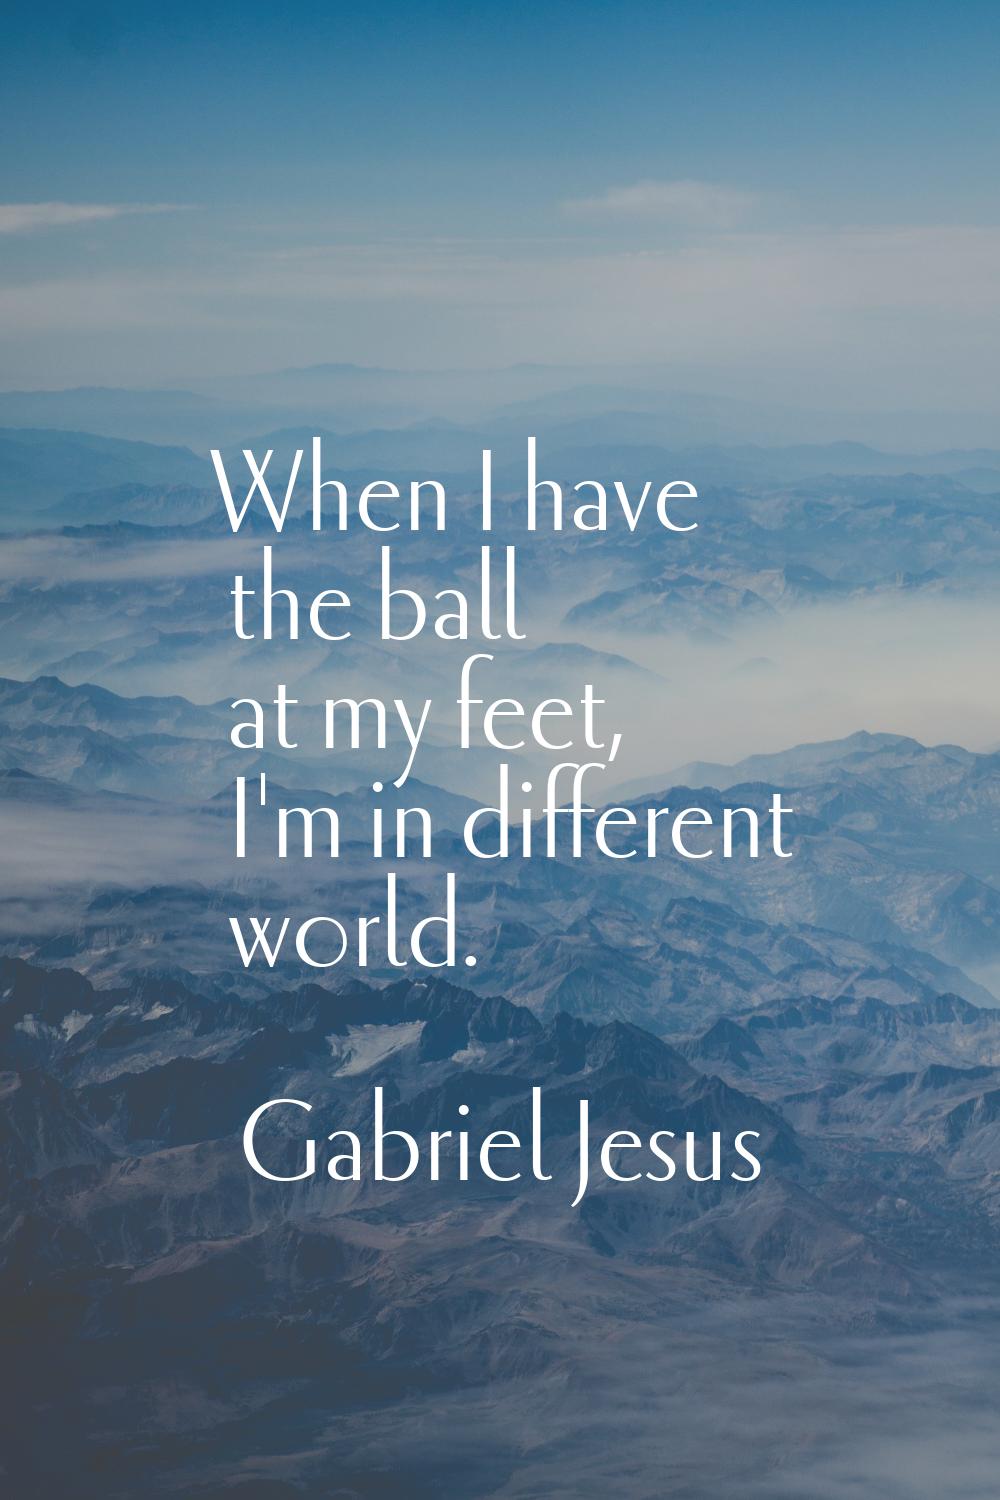 When I have the ball at my feet, I'm in different world.